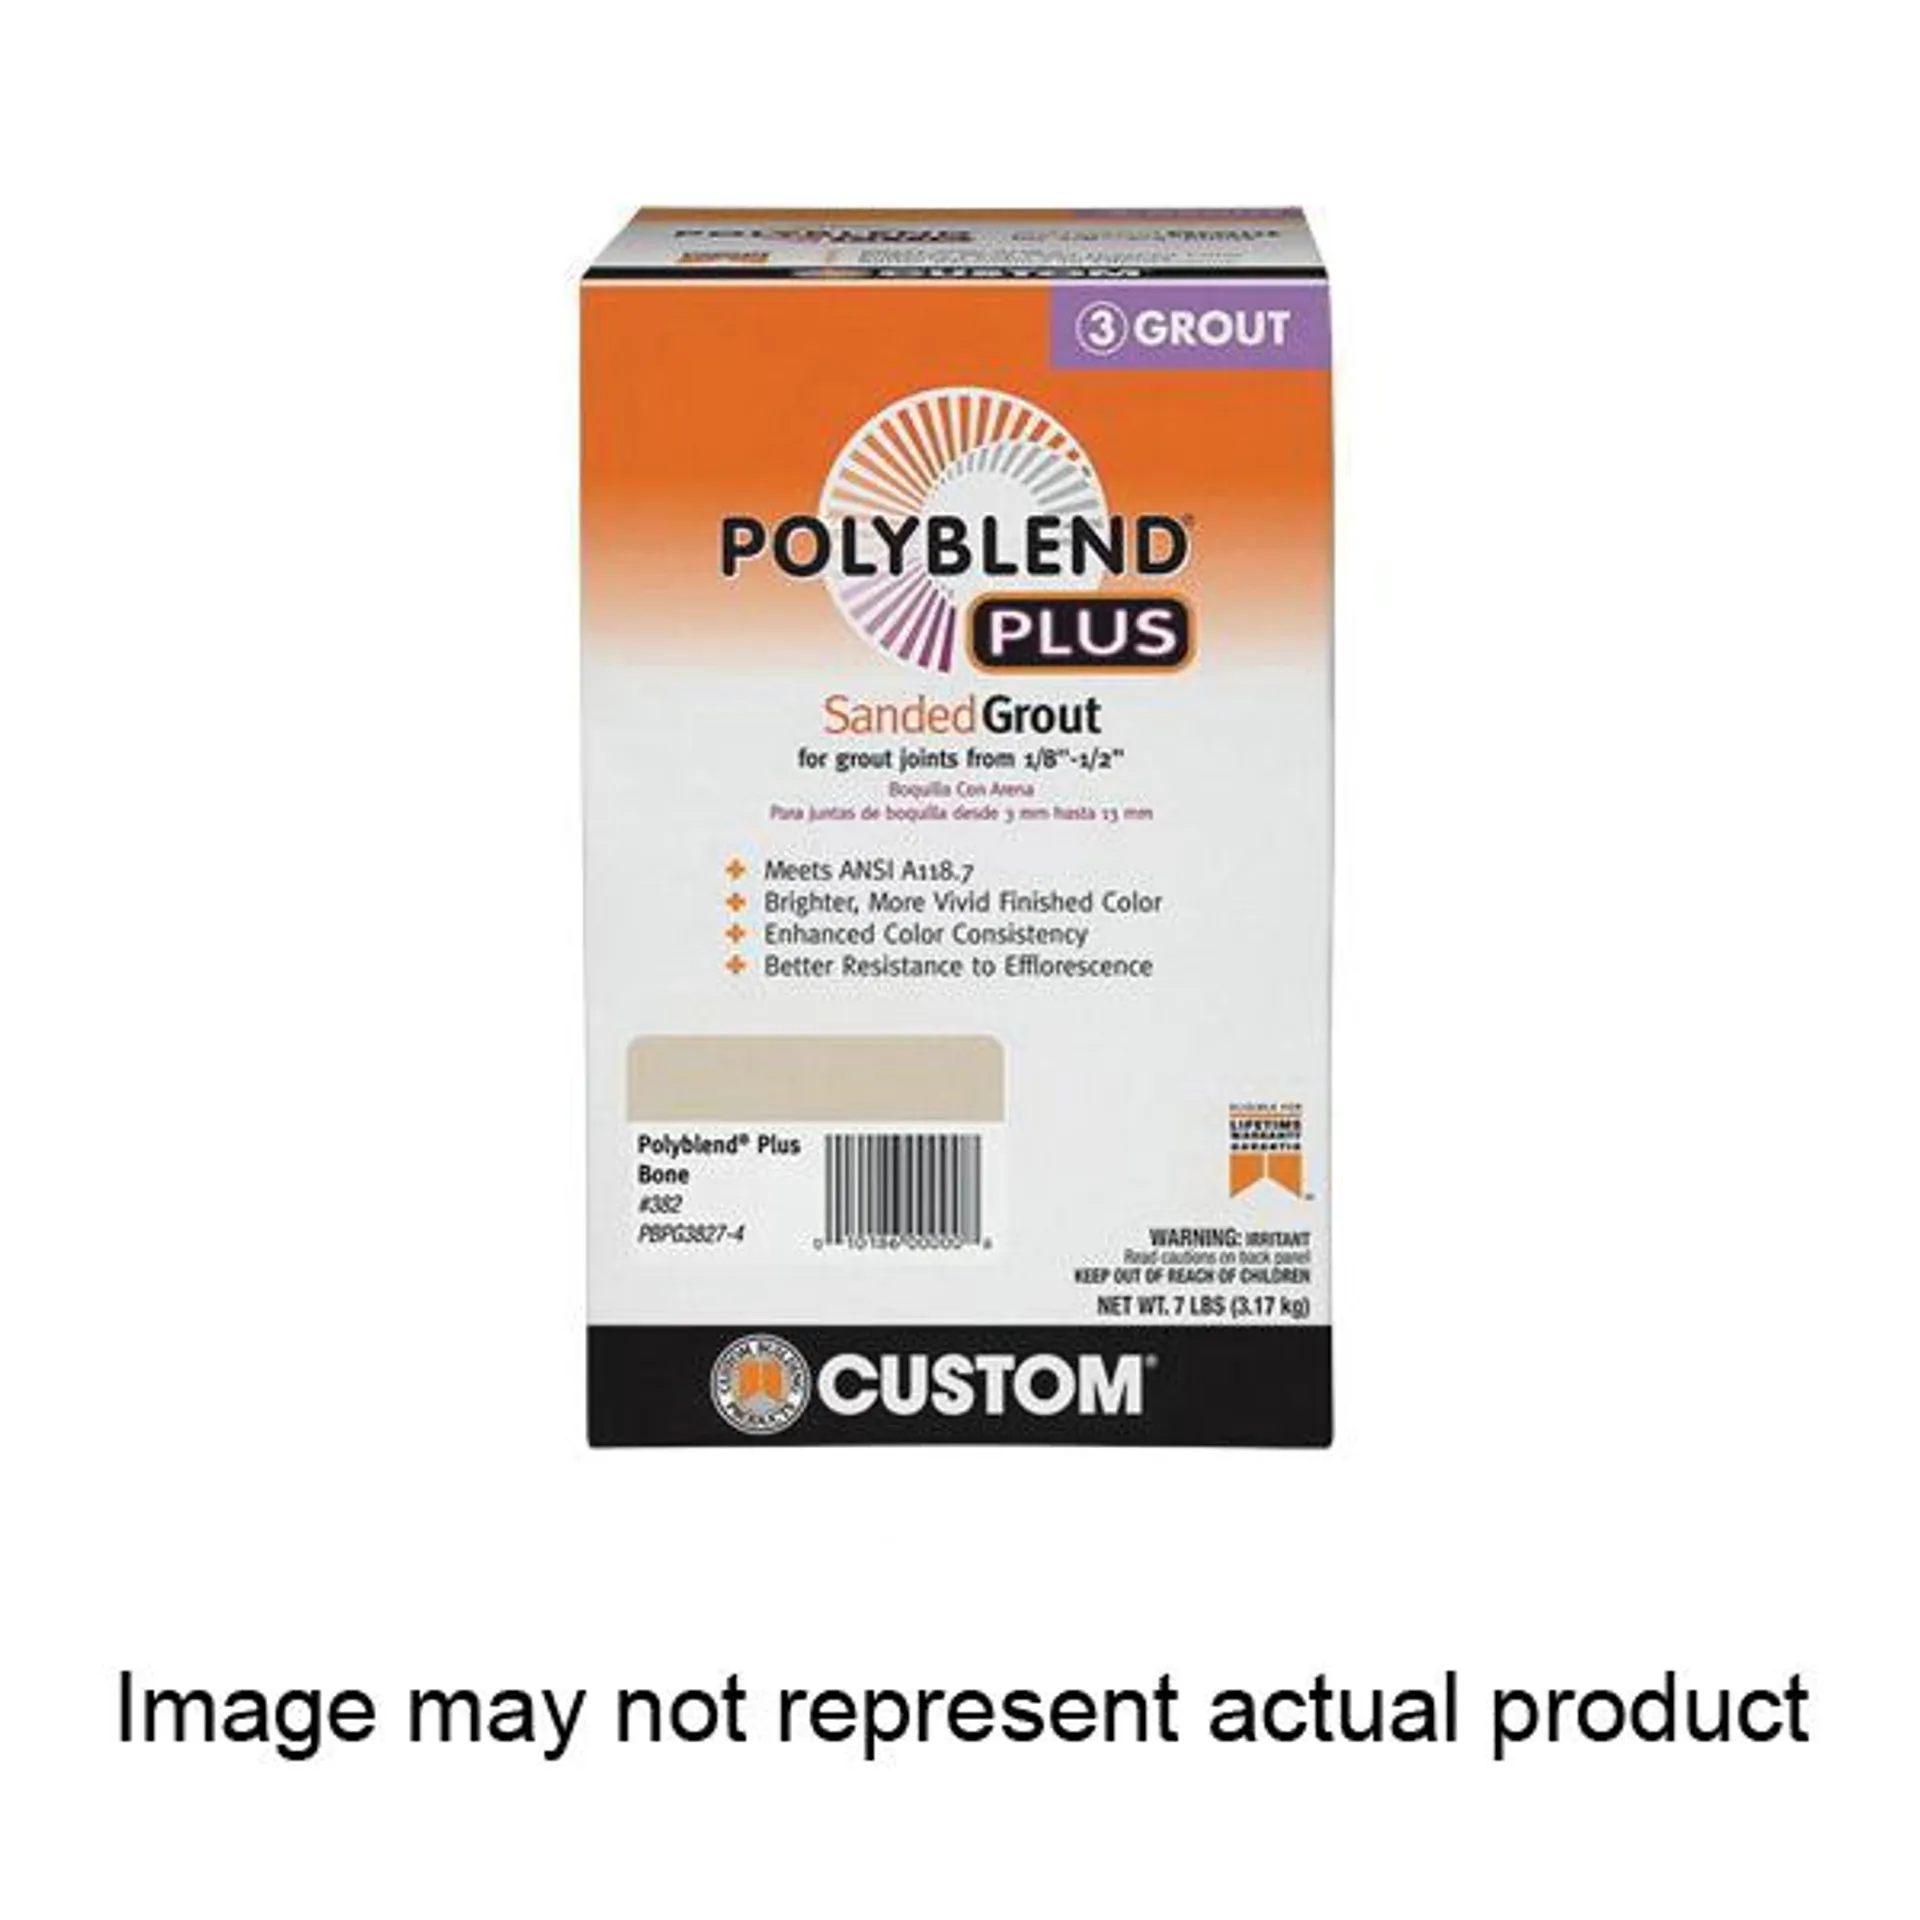 Polyblend Plus PBPG6467-4 Sanded Grout, Solid Powder, Characteristic, Coffee Bean, 7 lb Box